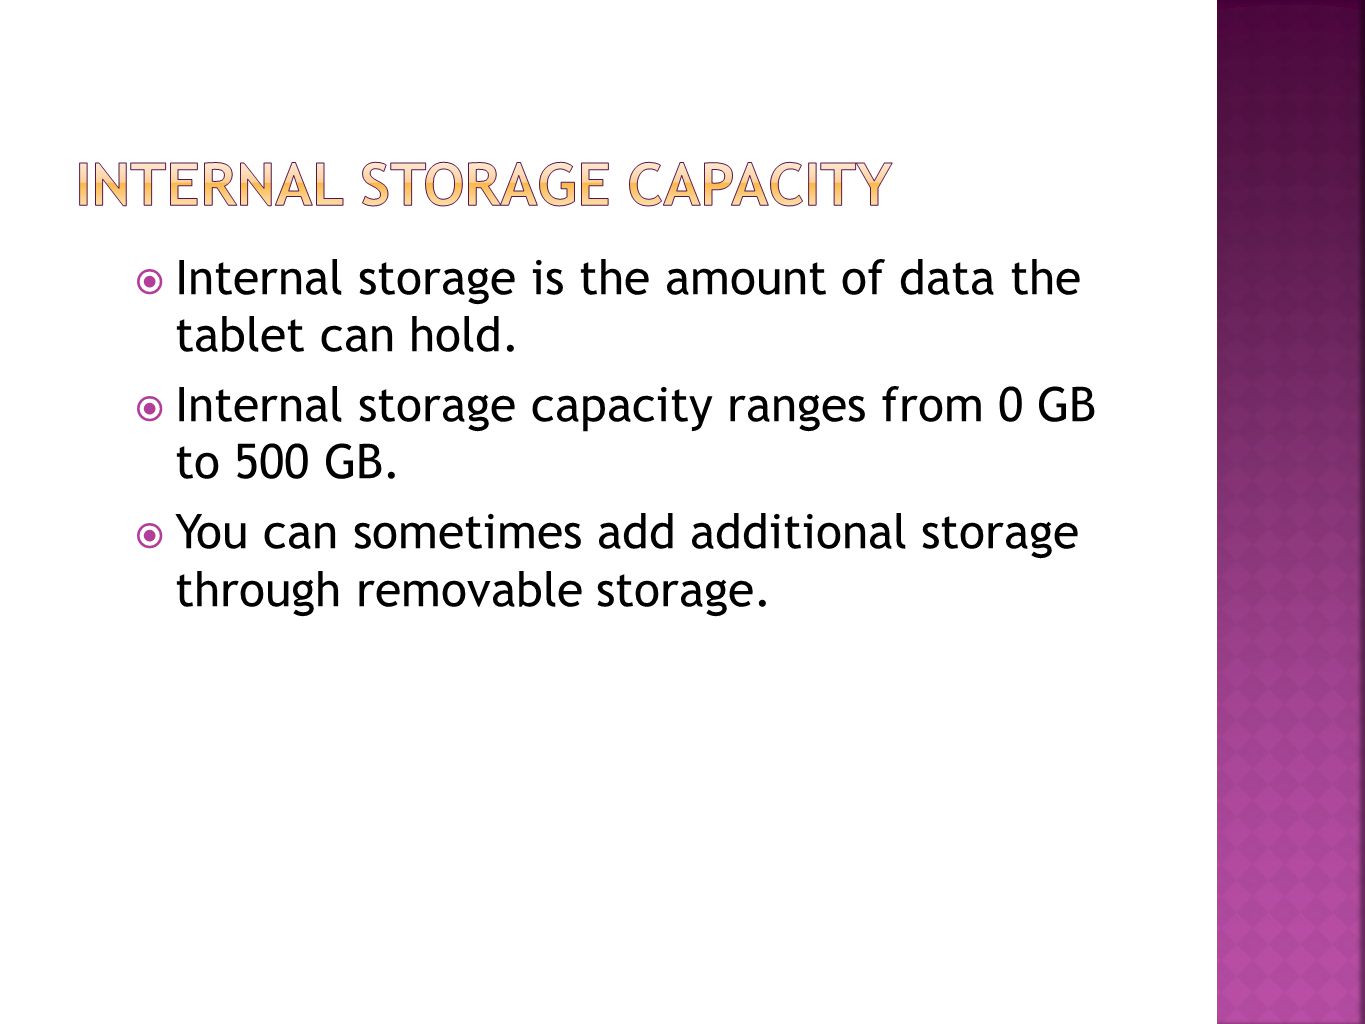  Internal storage is the amount of data the tablet can hold.